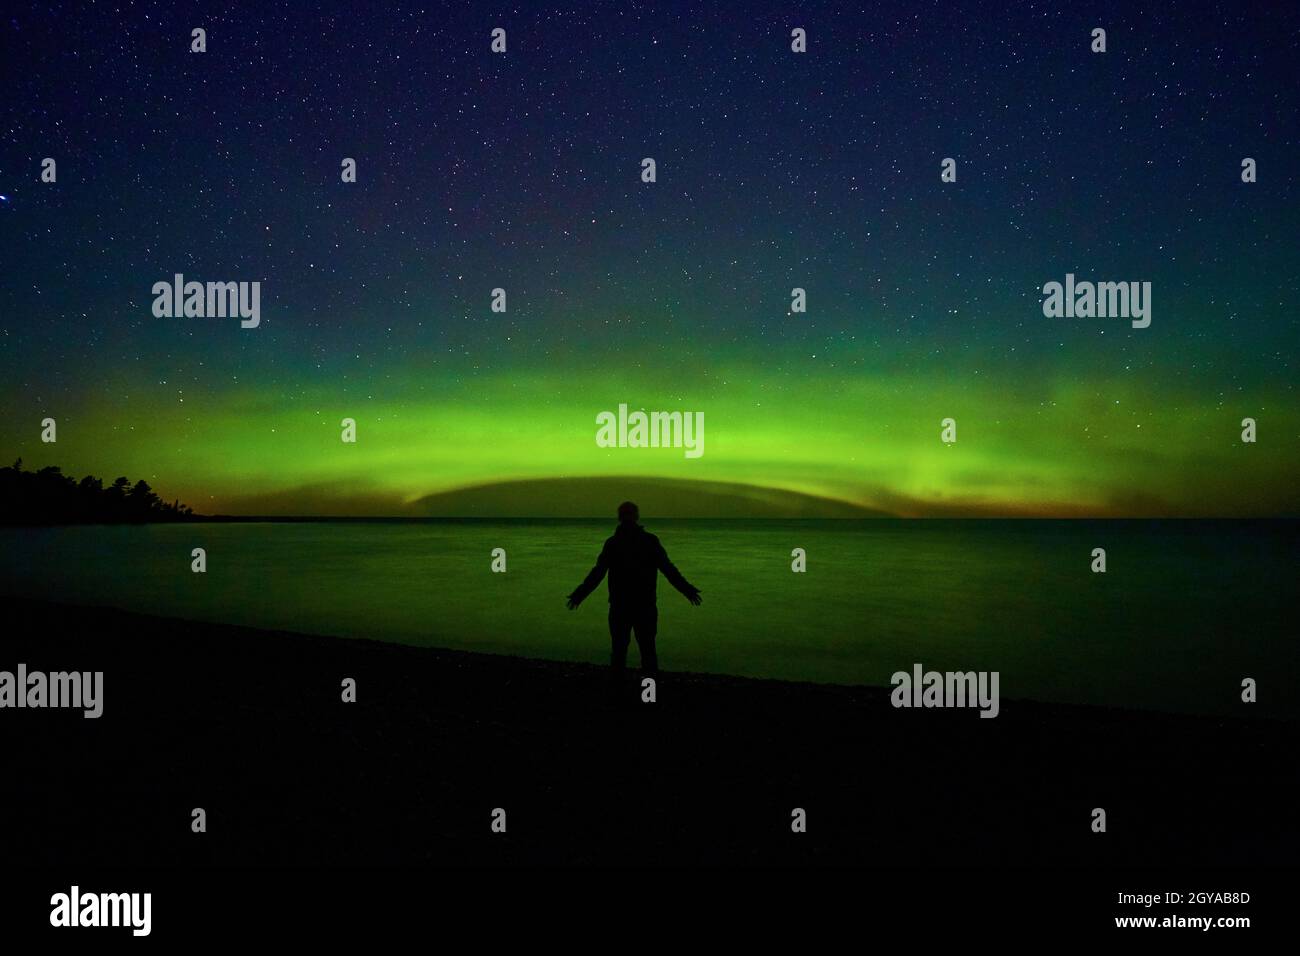 Man on edge of land before water lake ocean or sea with dome of green aurora light mist and tree silhouettes off to side Stock Photo